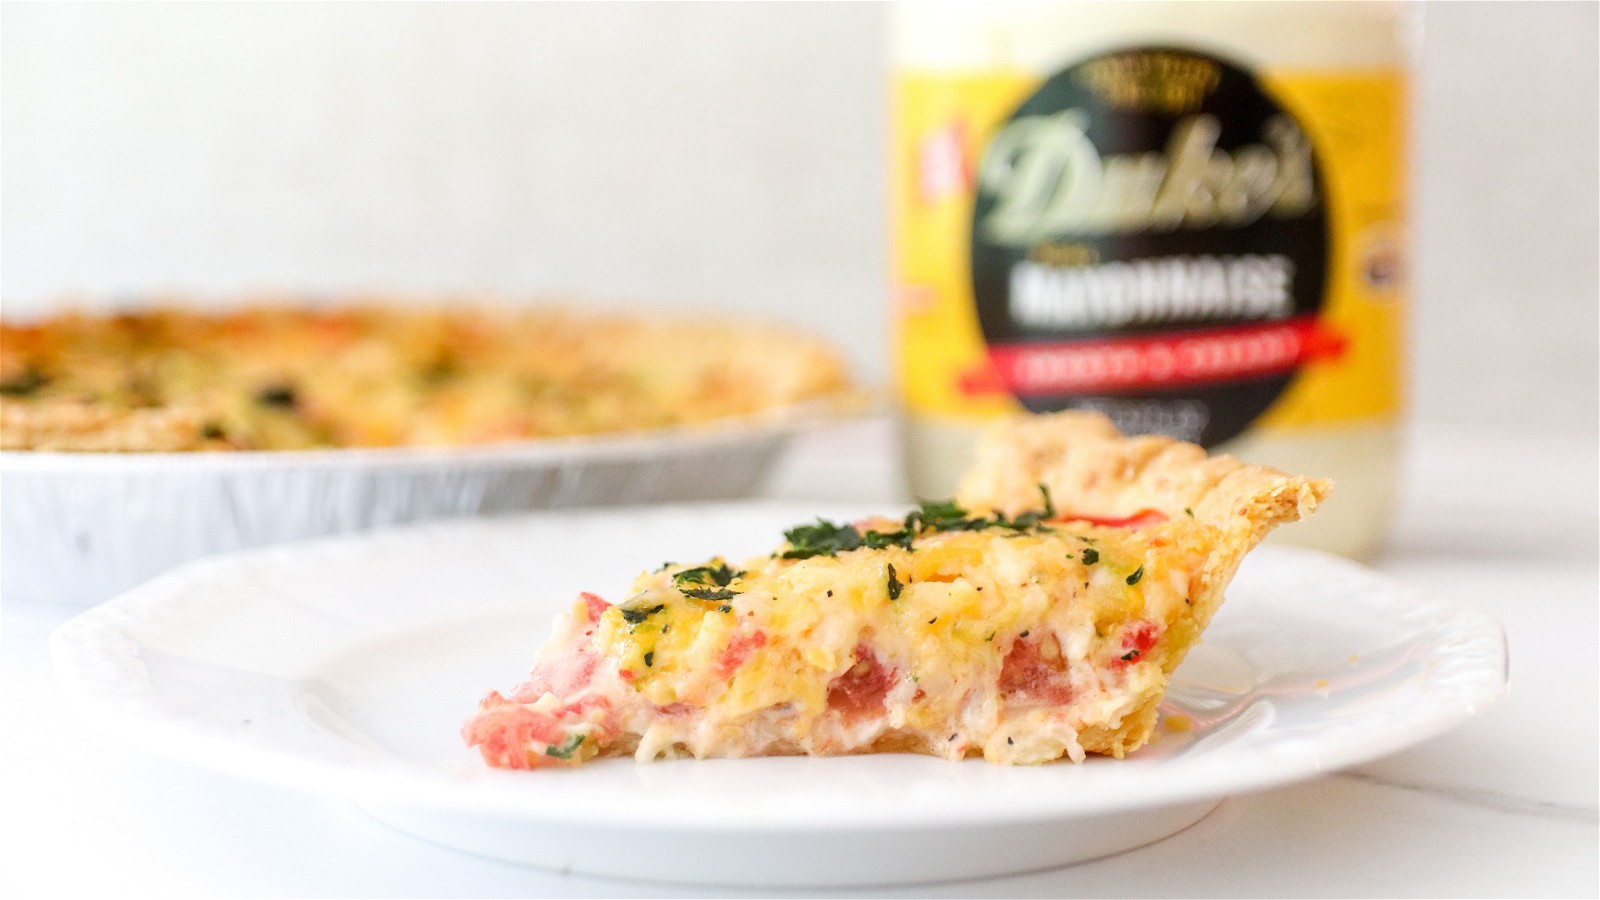 Image of Tomato Pie with Pimento Cheese Topping 